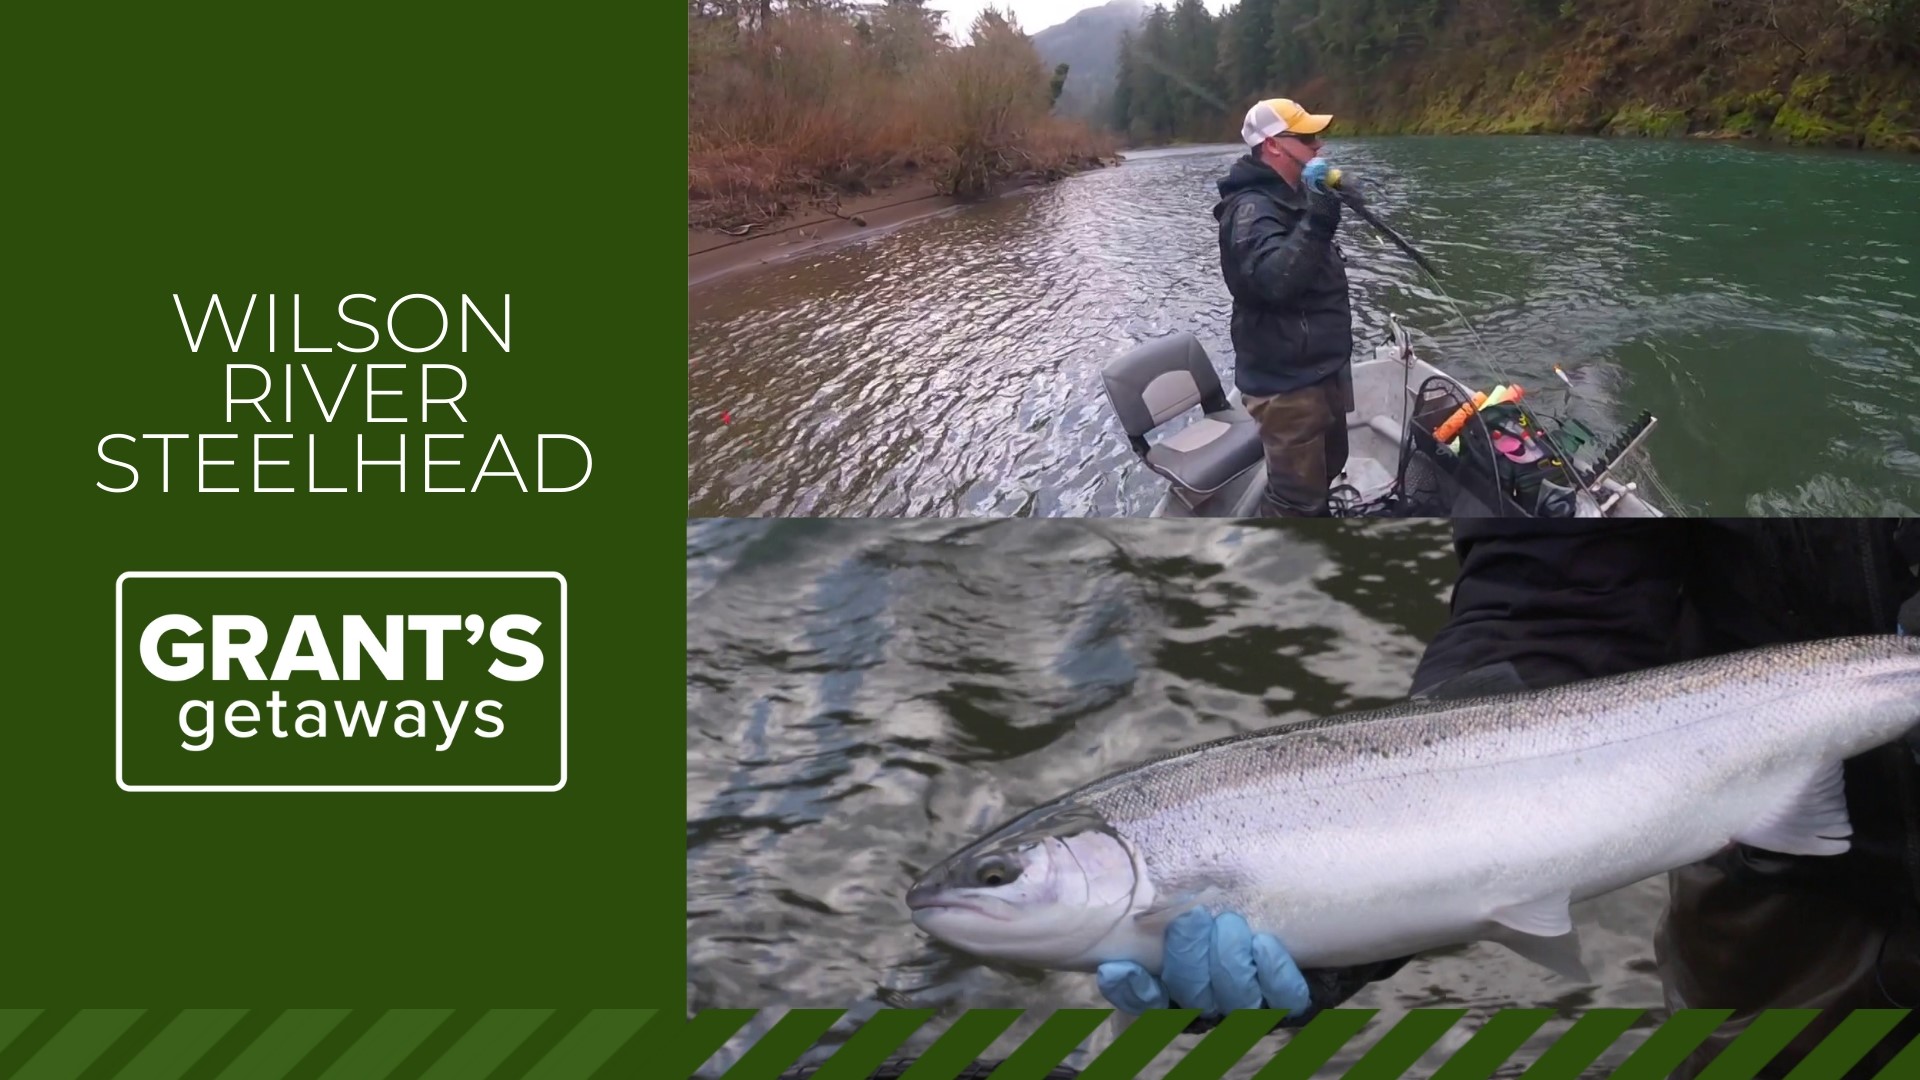 Volunteers on the Wilson River on the Oregon coast are making sure anglers get a good catch for years to come. Grant McOmie explains how.